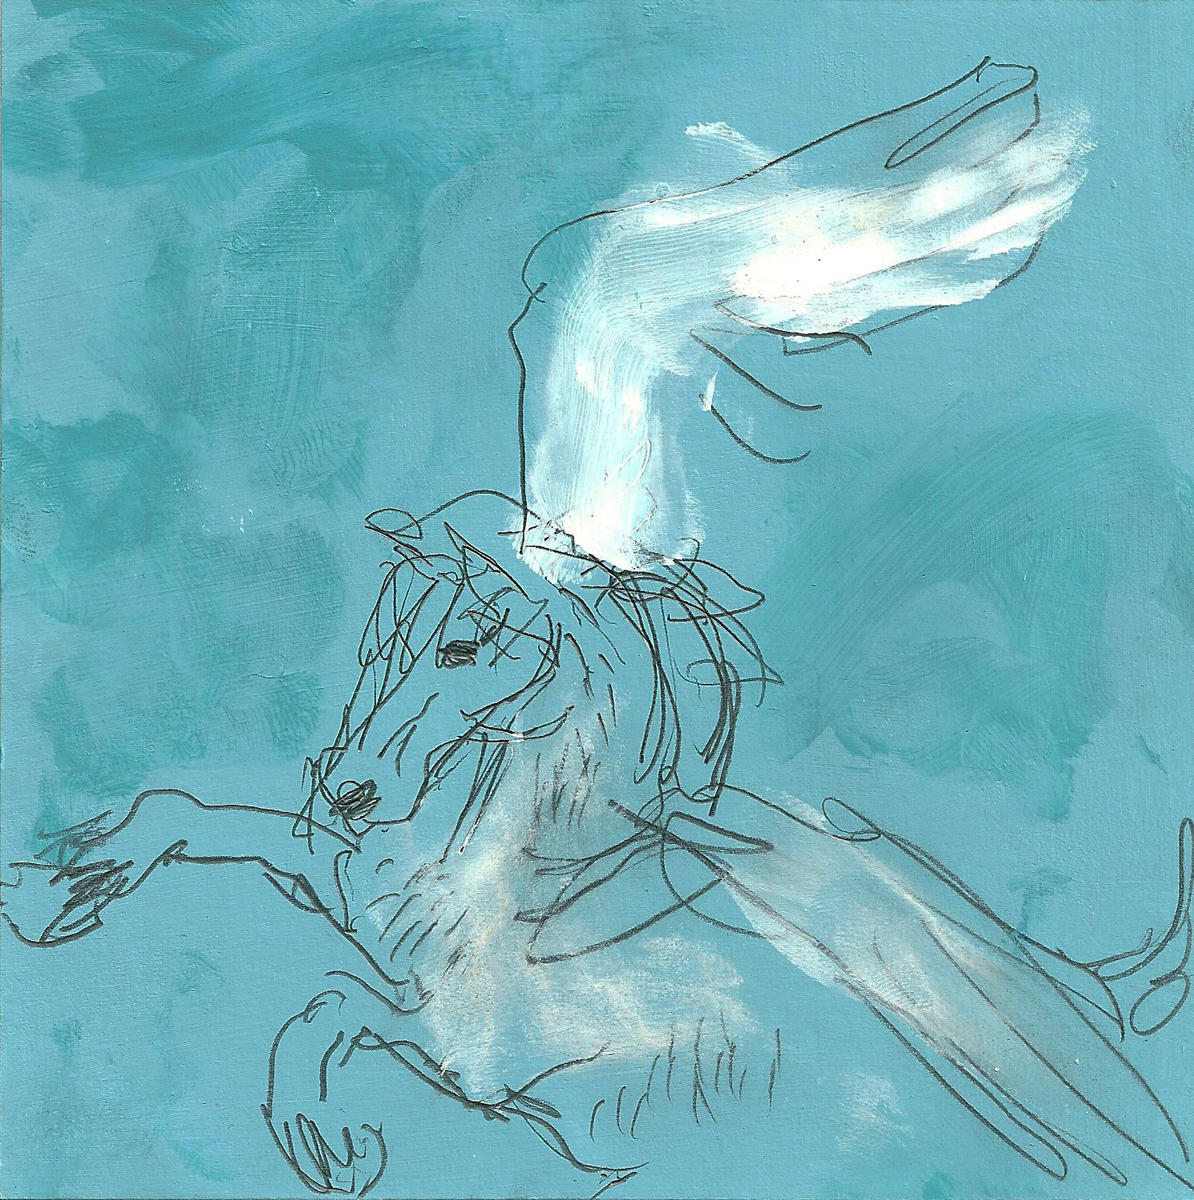 A pencil and painted drawing of a winged horse on a turquoise background.